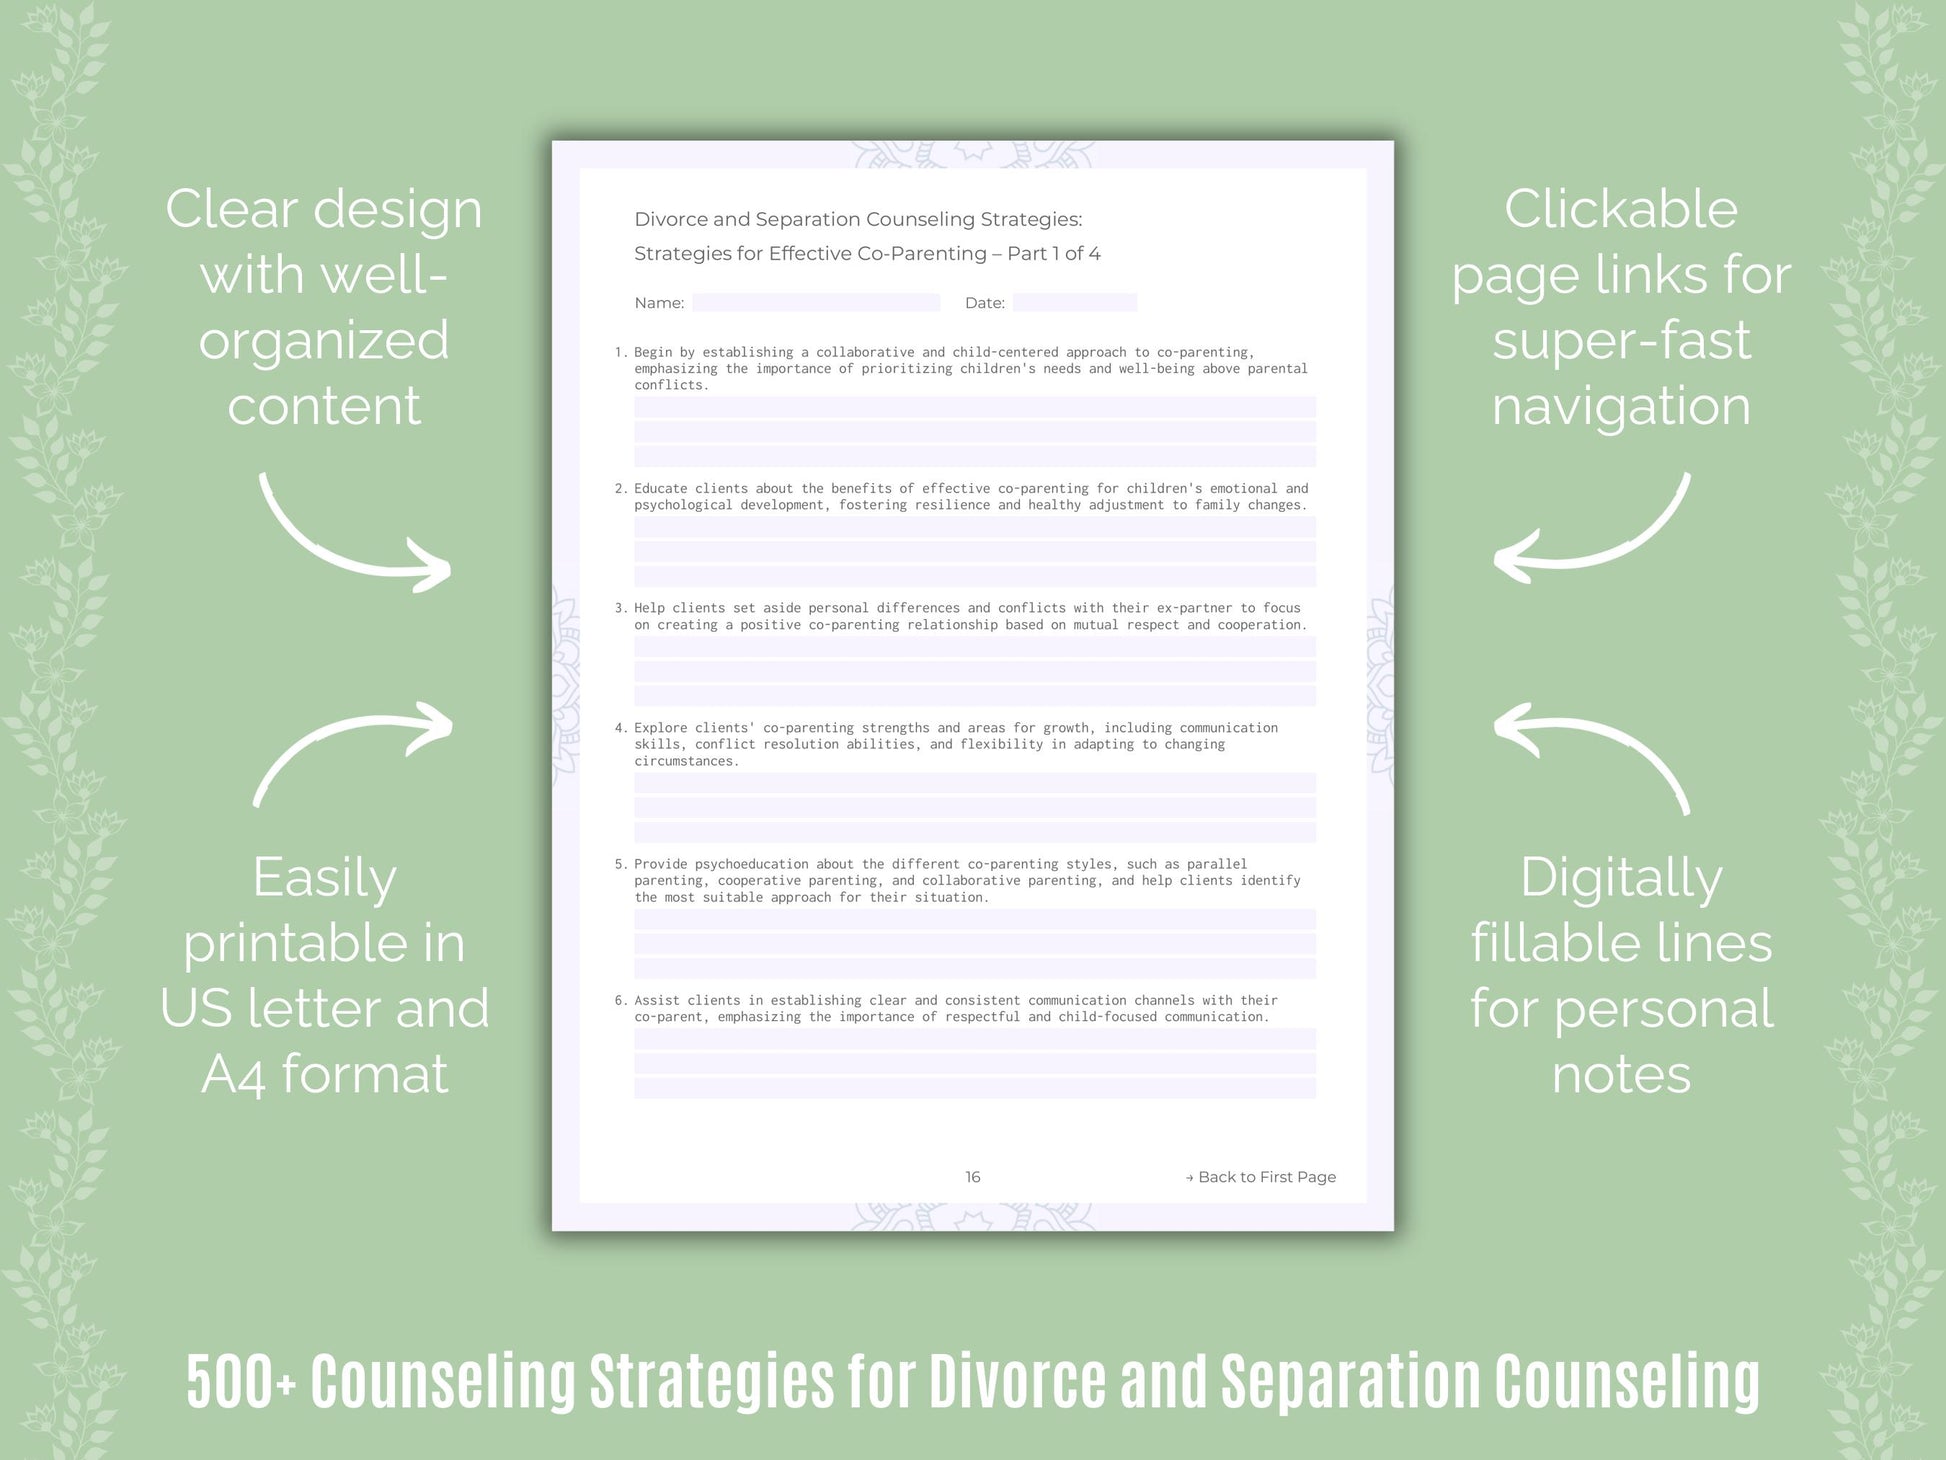 Divorce and Separation Counseling Strategies Resource